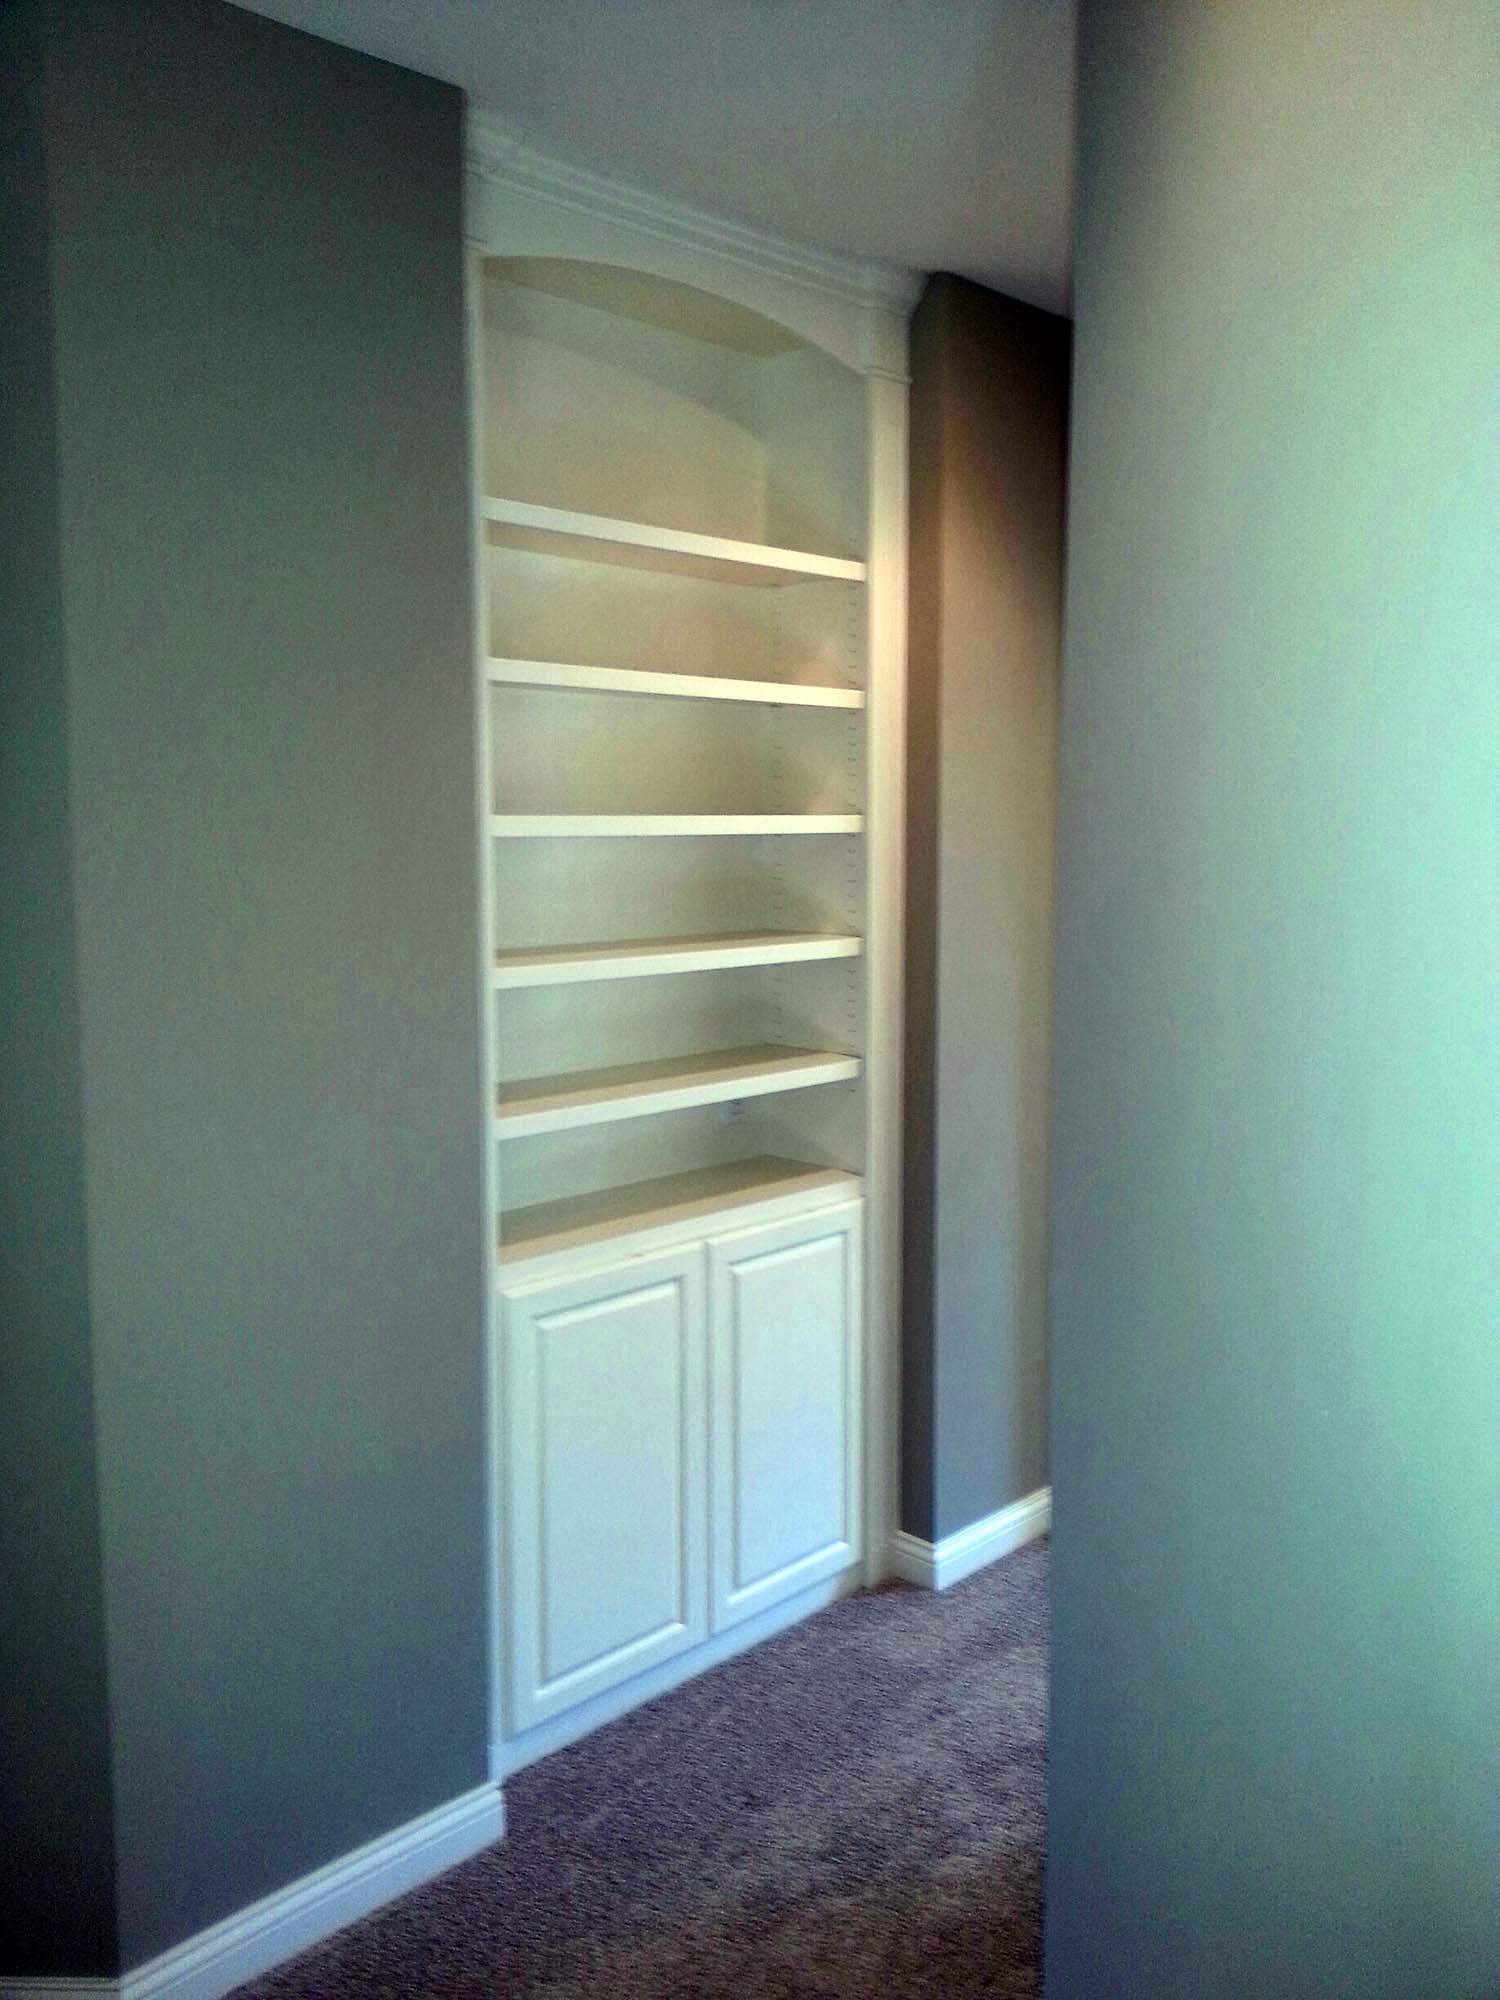 <p>Built in bookcase reccessed into wall</p>